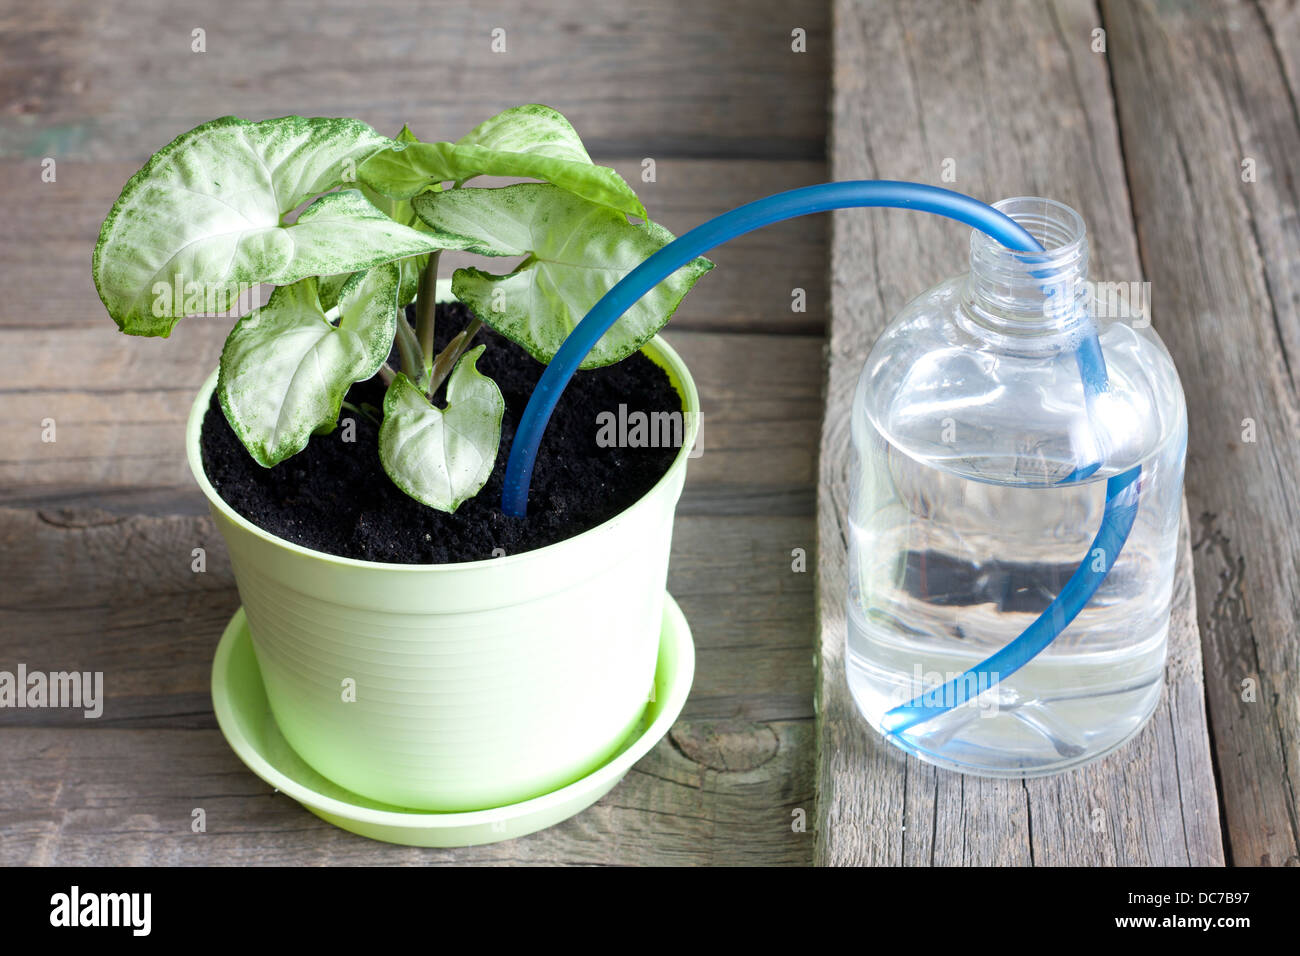 Invention of watering plants creative concept of protection Stock Photo